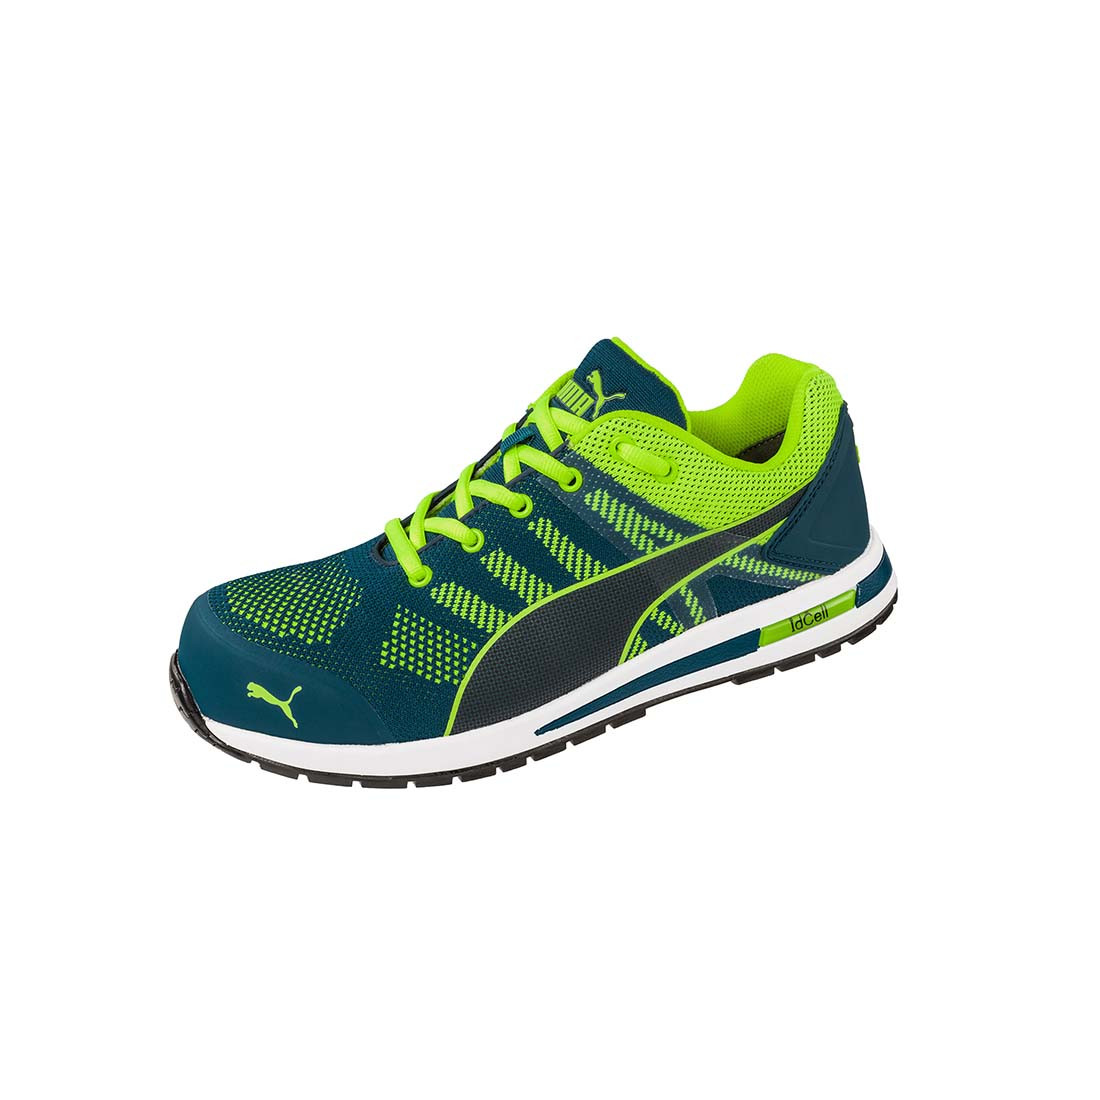 Puma S1P Low Shoes Elevate Knit Green - Footwear